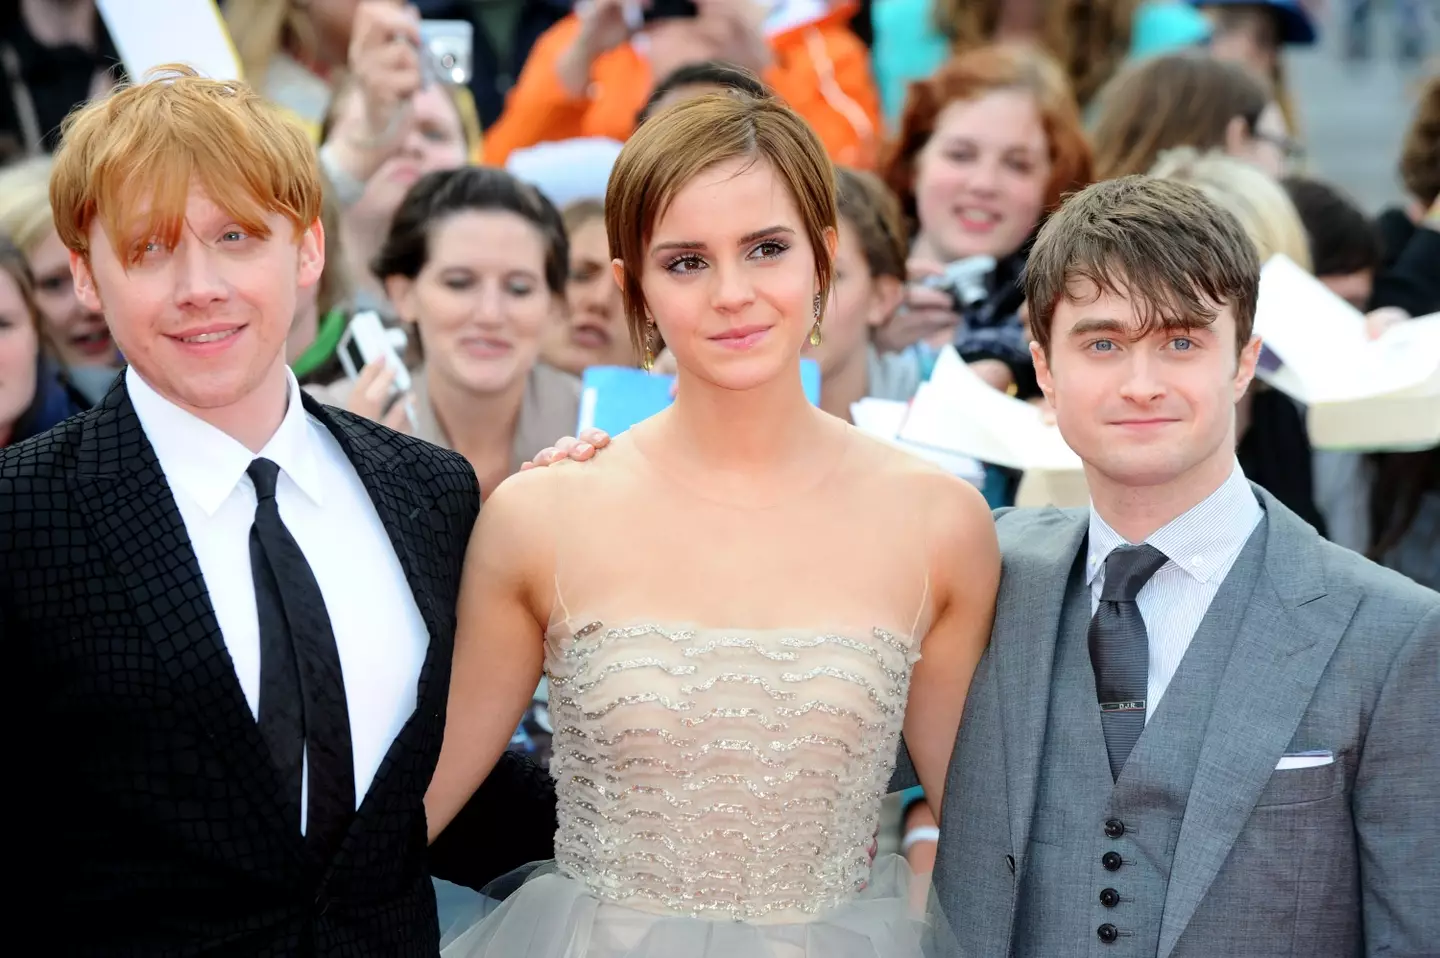 Emma Watson and Daniel Radcliffe with Harry Potter co-star Rupert Grint. (Anthony Harvey/Getty Images)